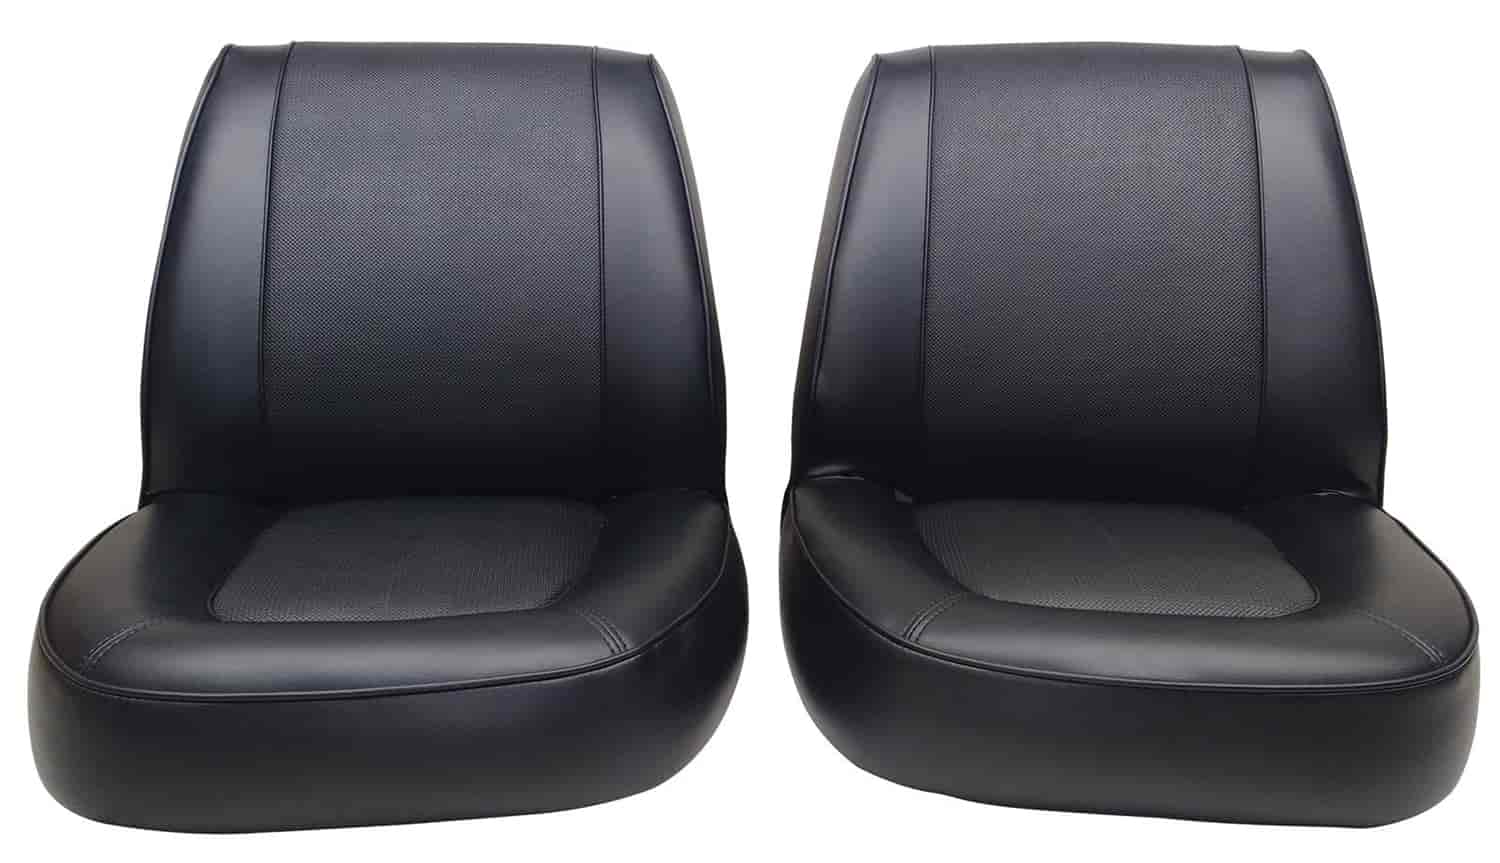 1964 Ford Falcon Futura Convertible Interior Front Bucket Seat Upholstery Set